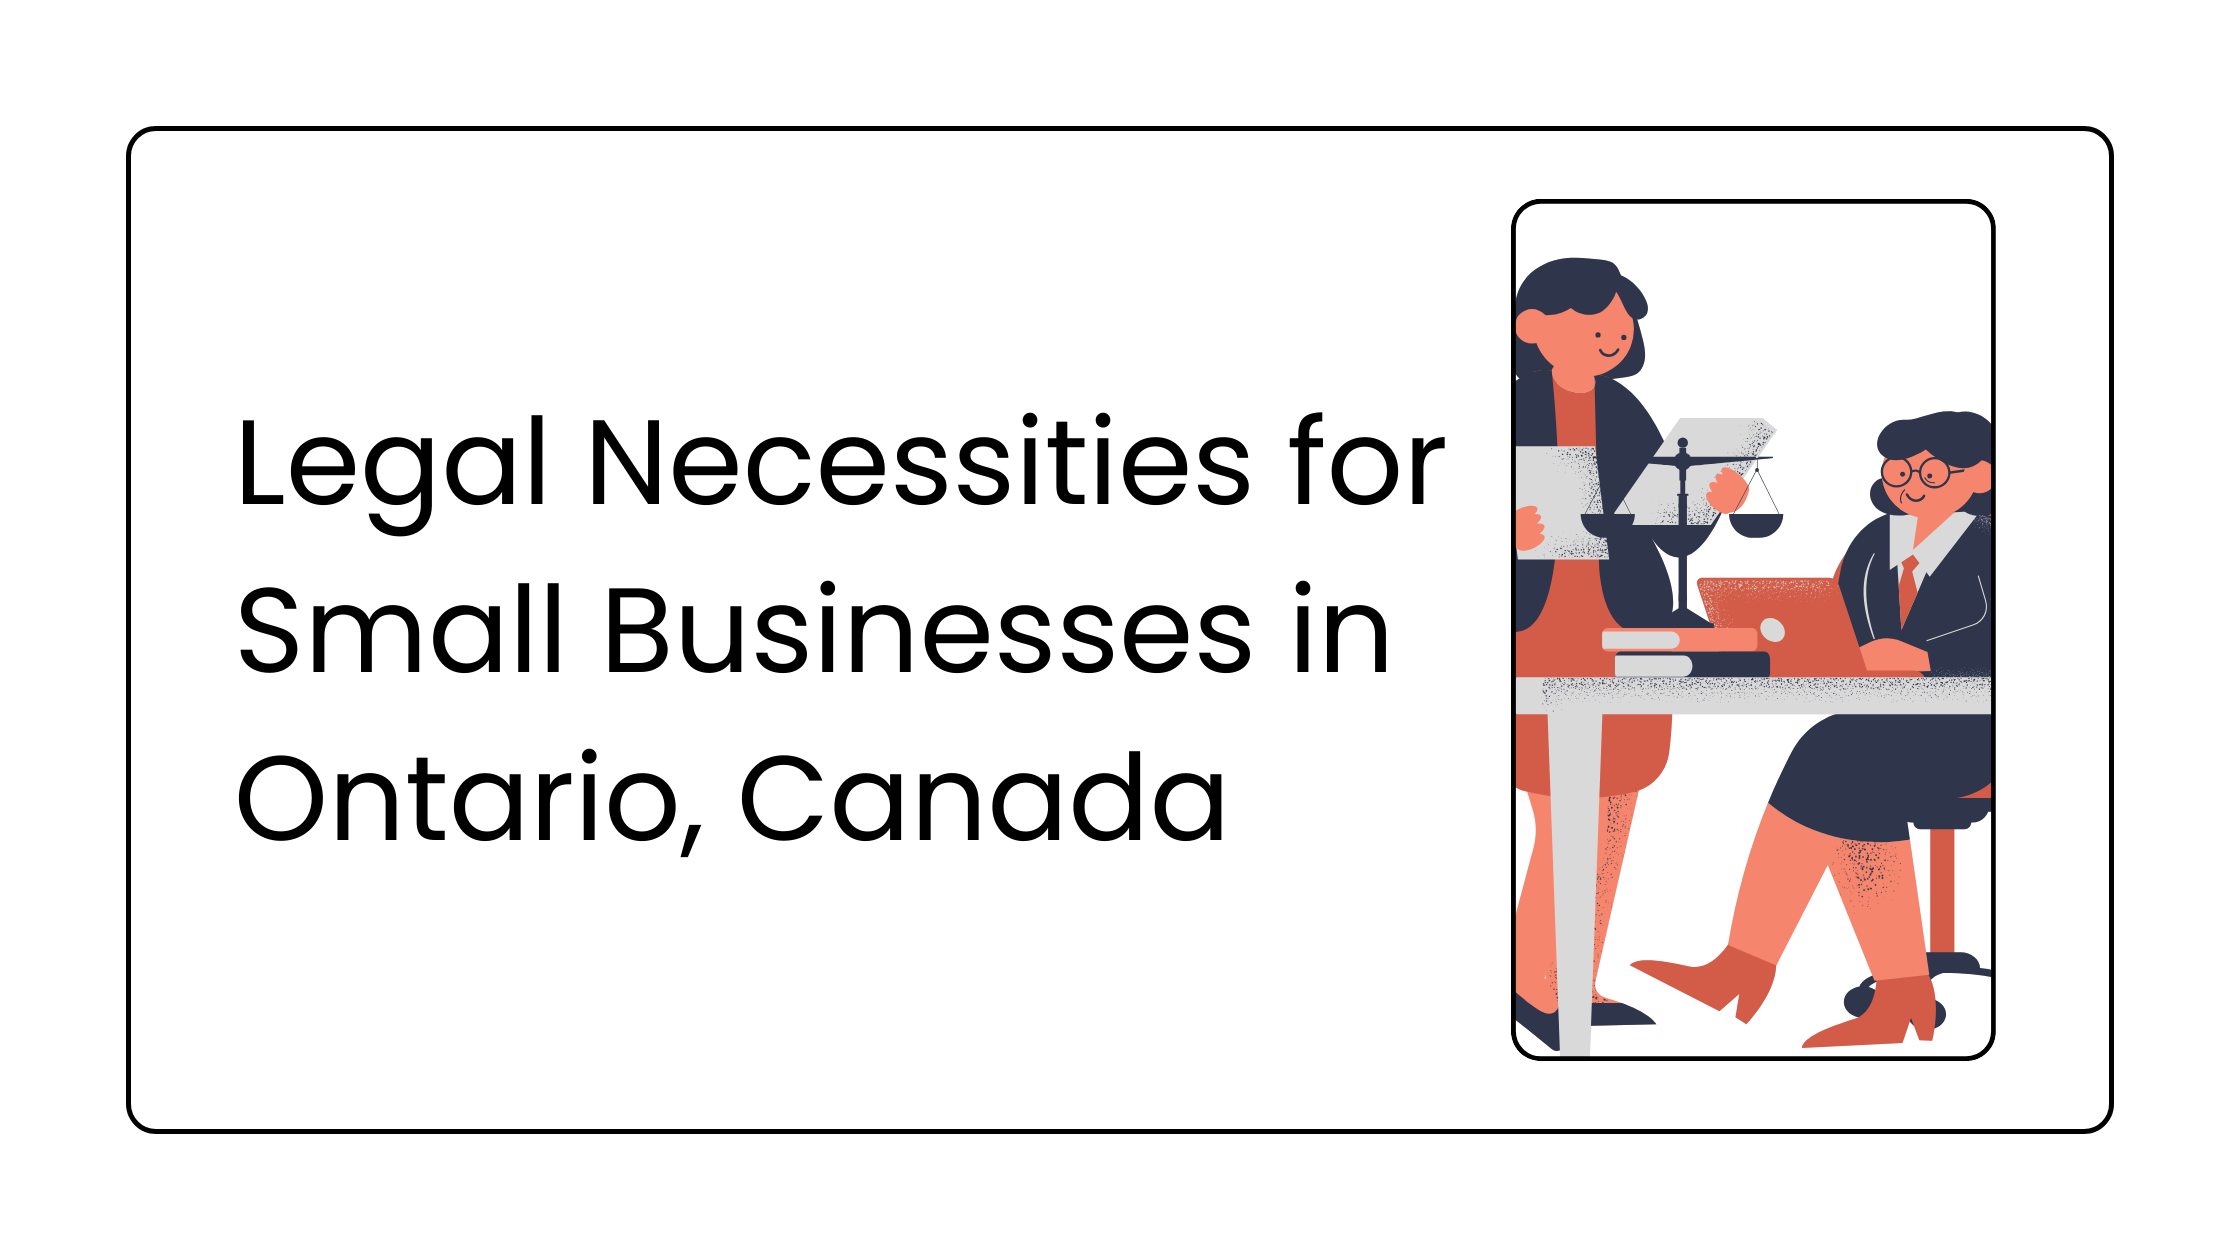 Legal Necessities for Small Businesses in Ontario, Canada